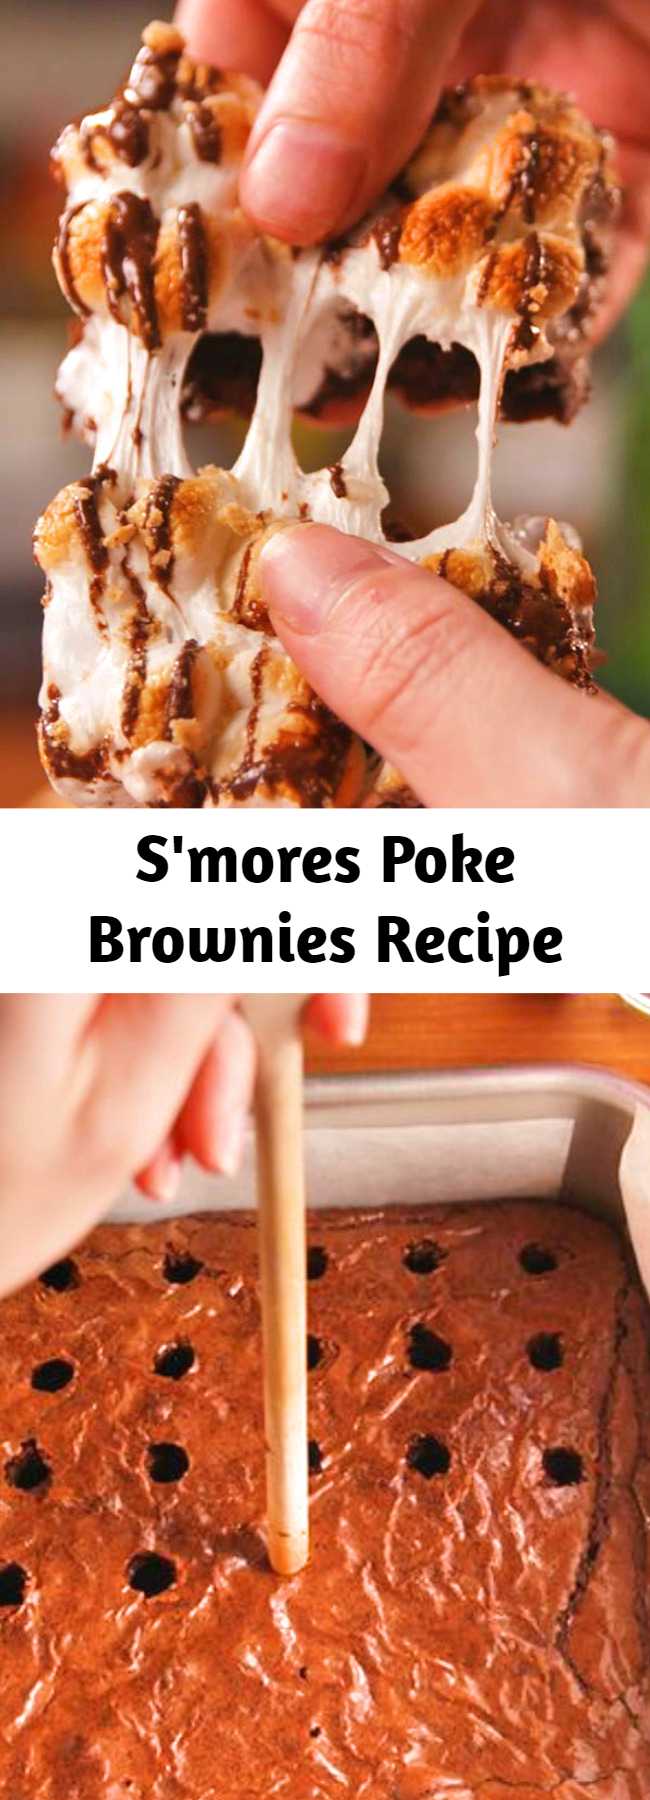 S'mores Poke Brownies Recipe - Just when we thought we had seen every type of s'more possible this one blew us away. Brownies get poked AND topped with marshmallows and then drizzled with chocolate. We are in love.